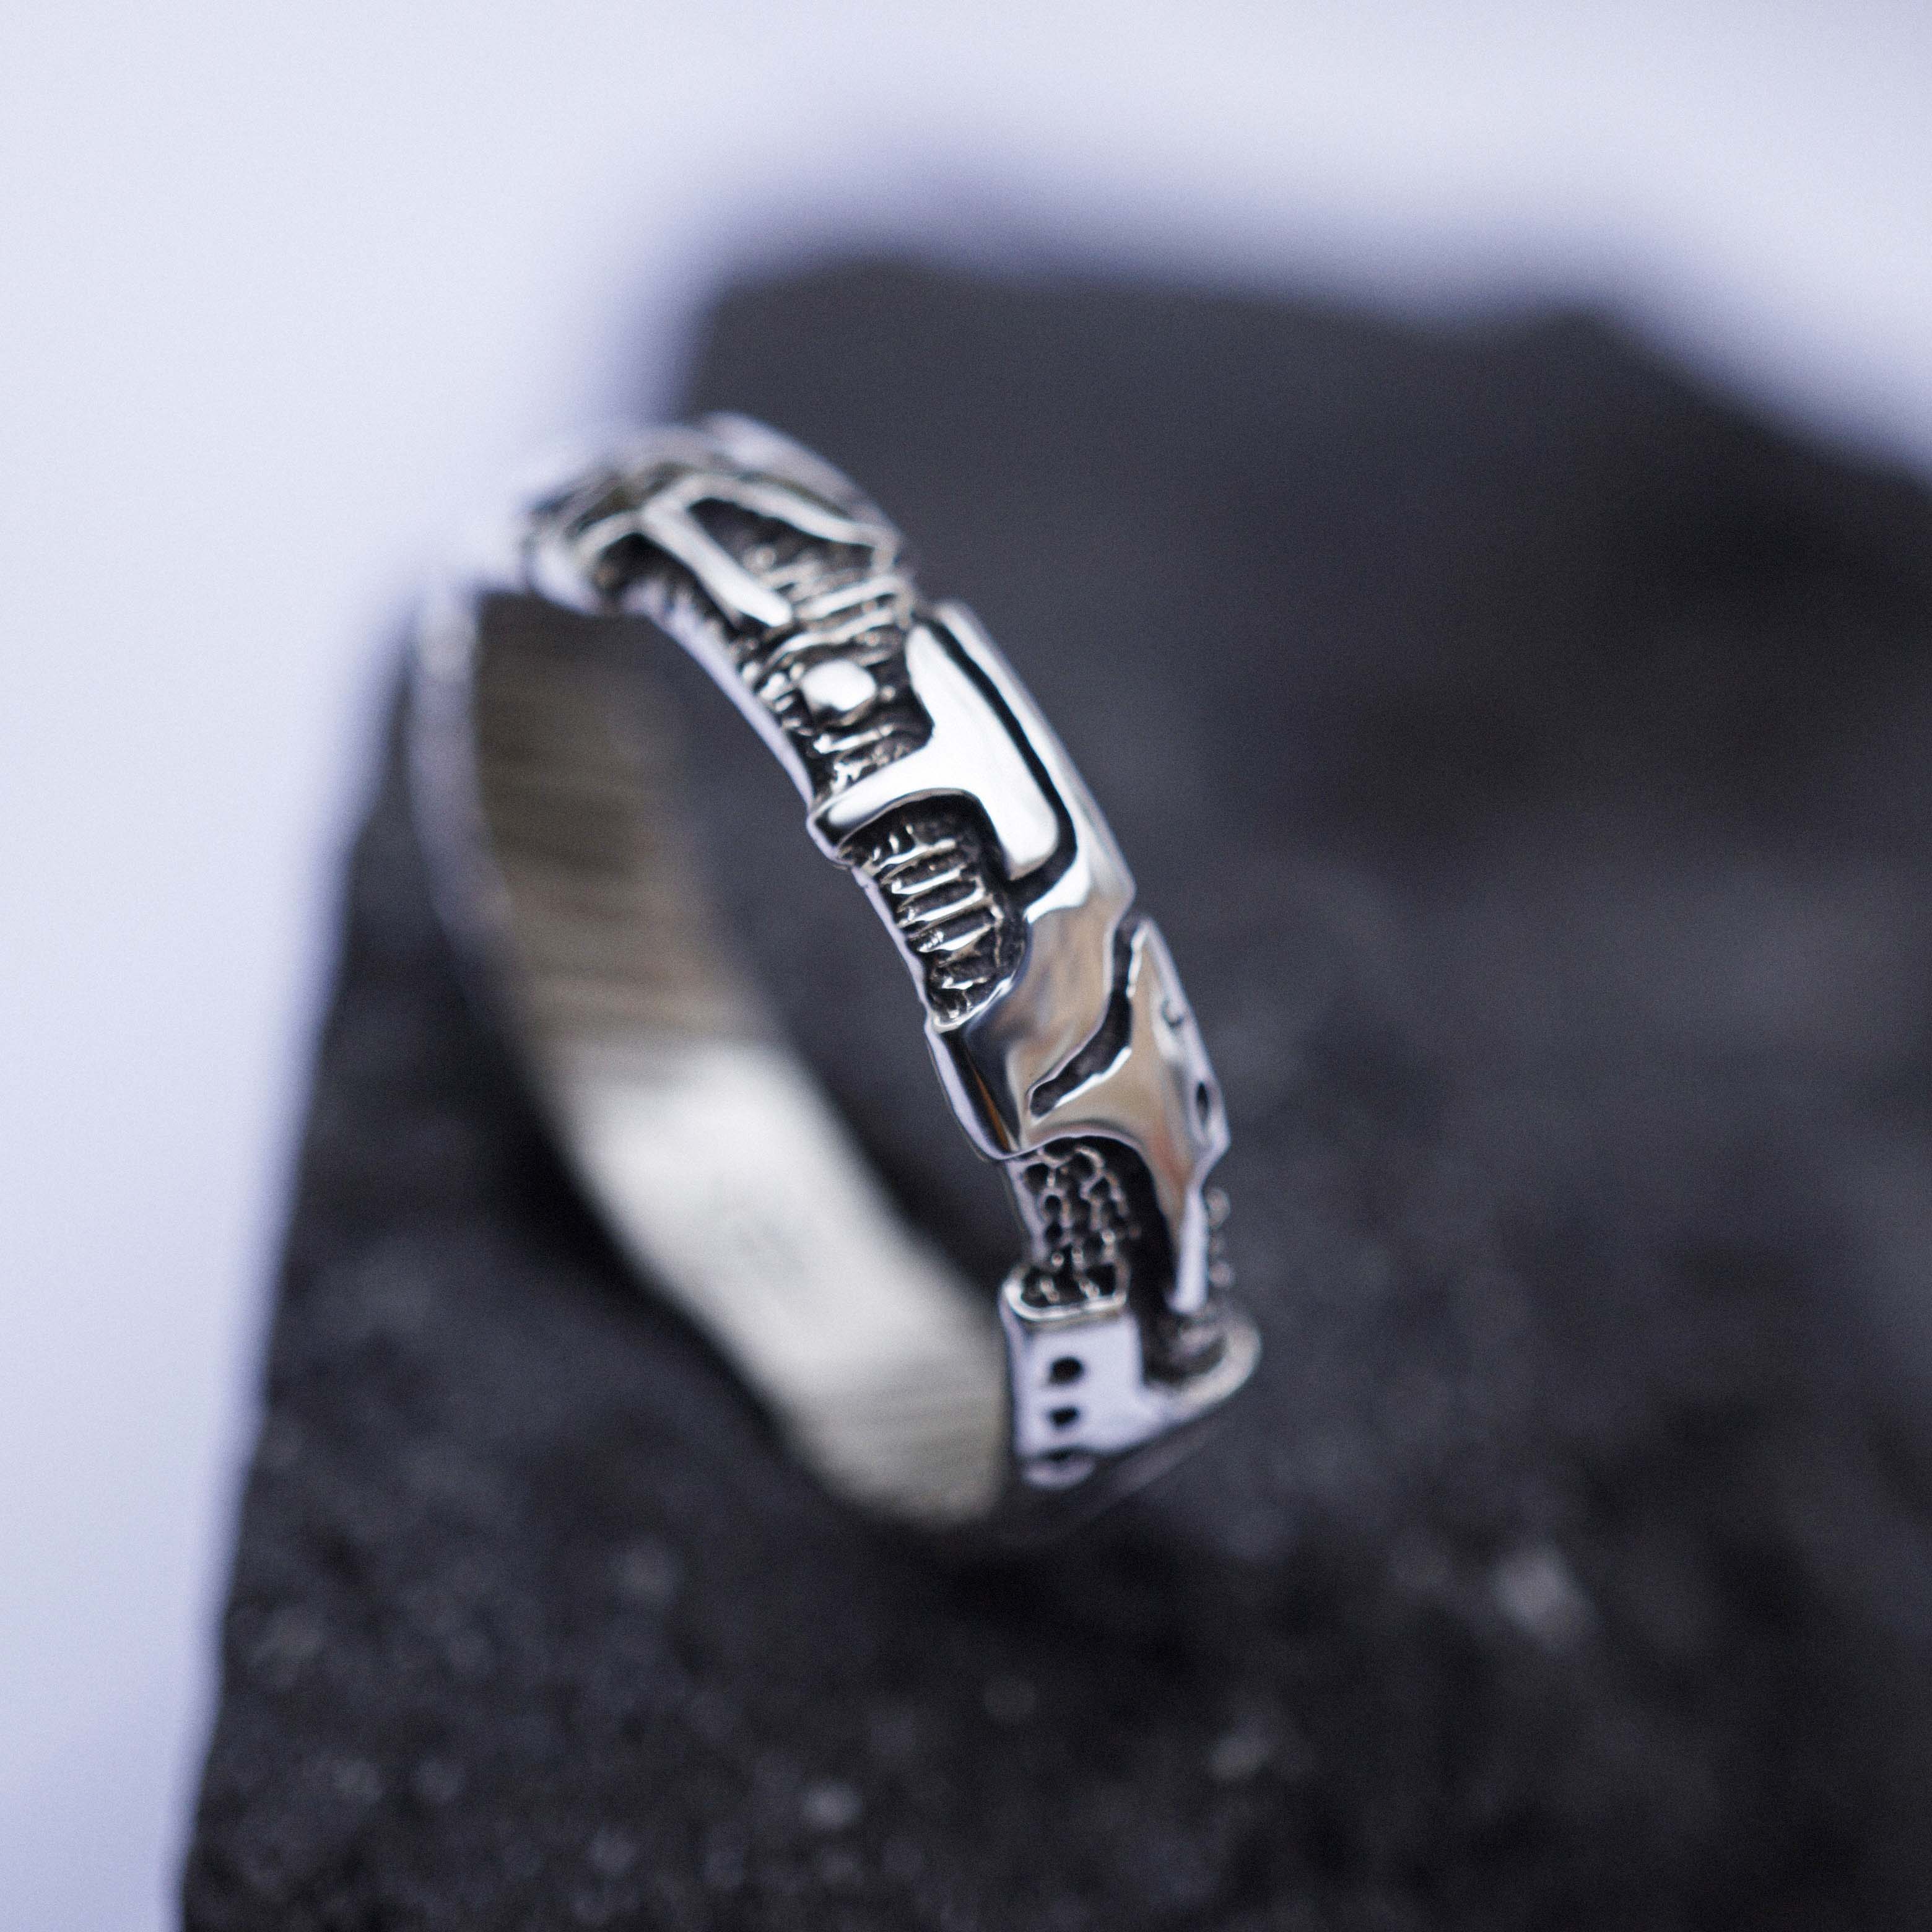 Mens silver band from the sterling silver and handcrafted cyberpunk design 